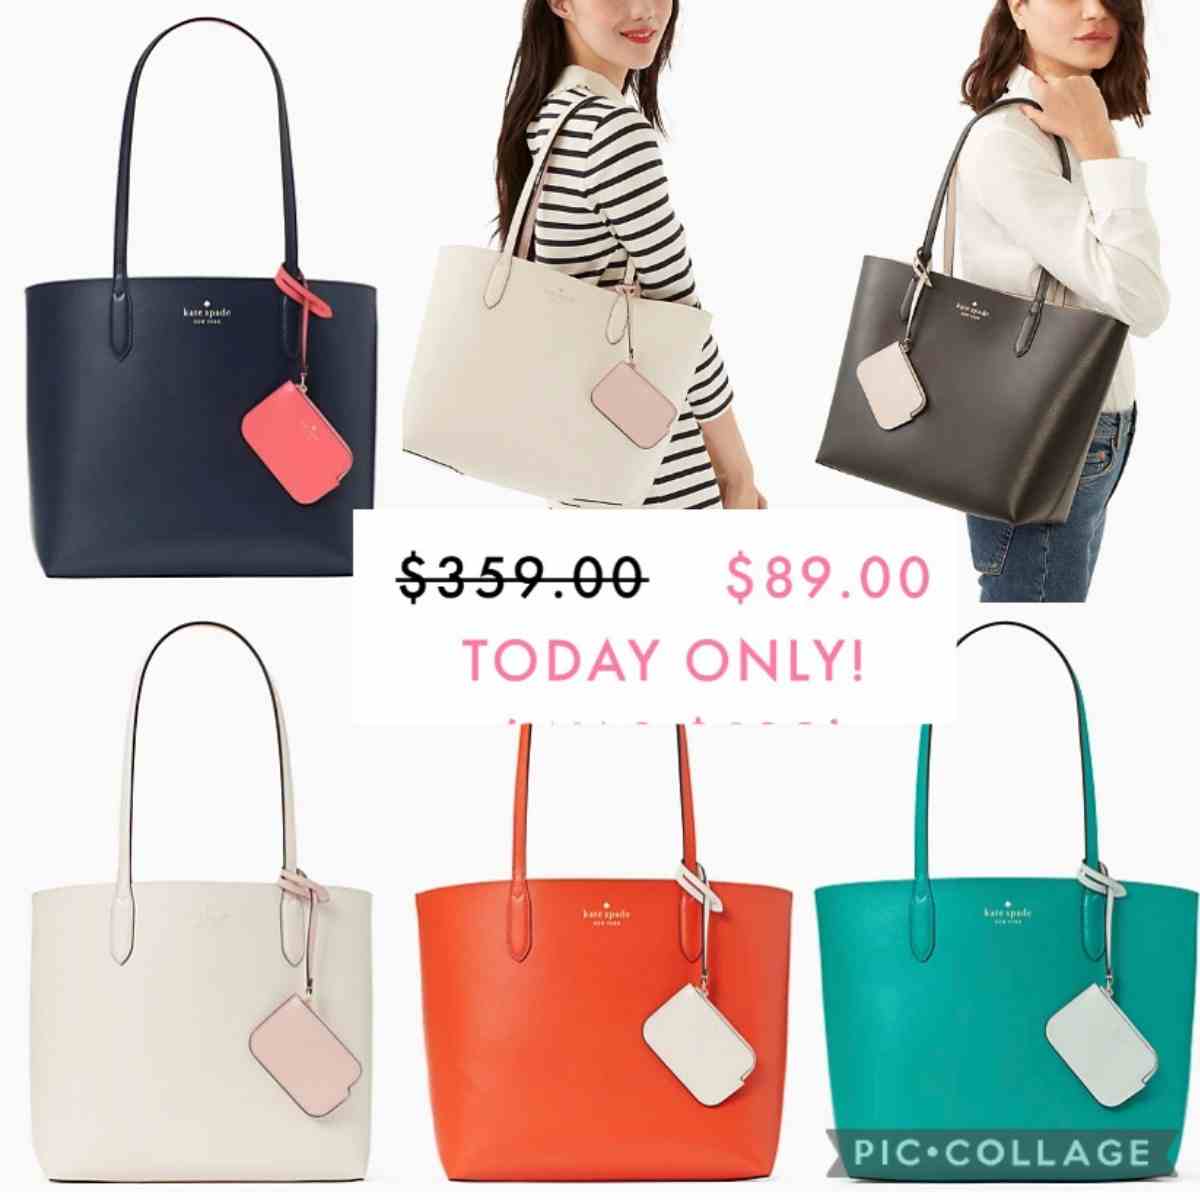 kate Spade ava reversible leather tote for $89 (Reg $359) | Smart Savers